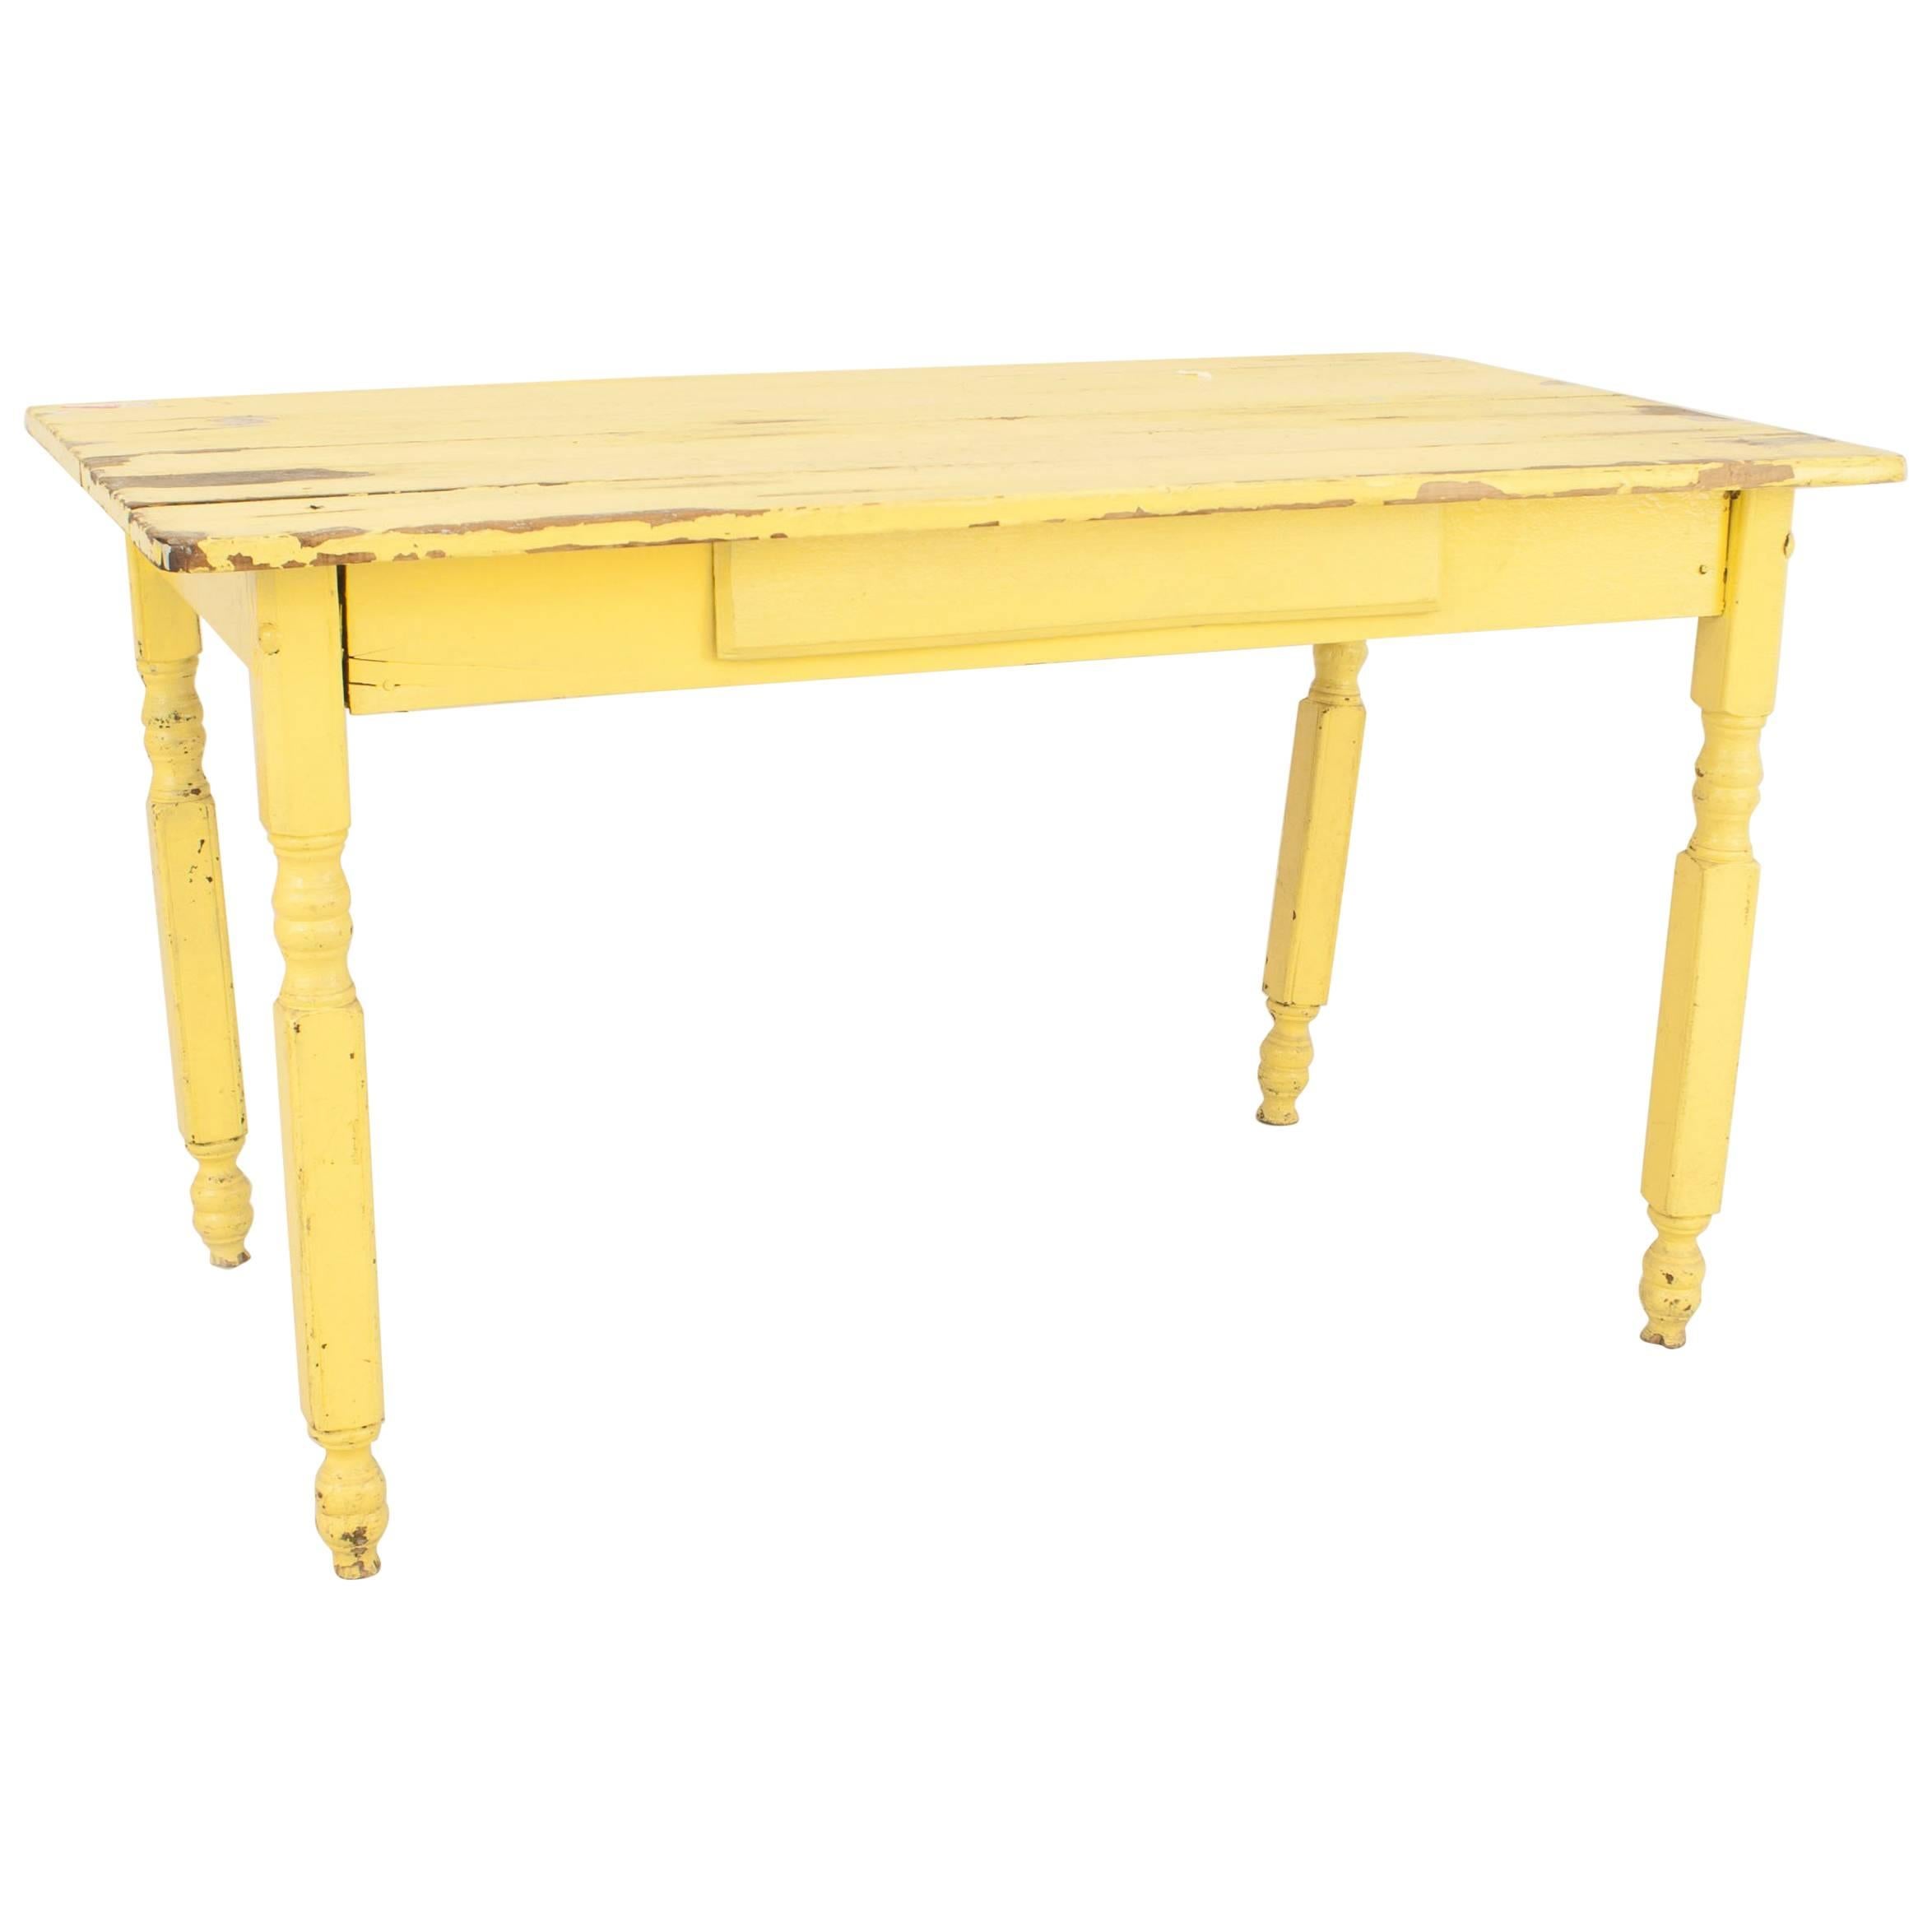 American Country Rustic Yellow Painted Dining Table